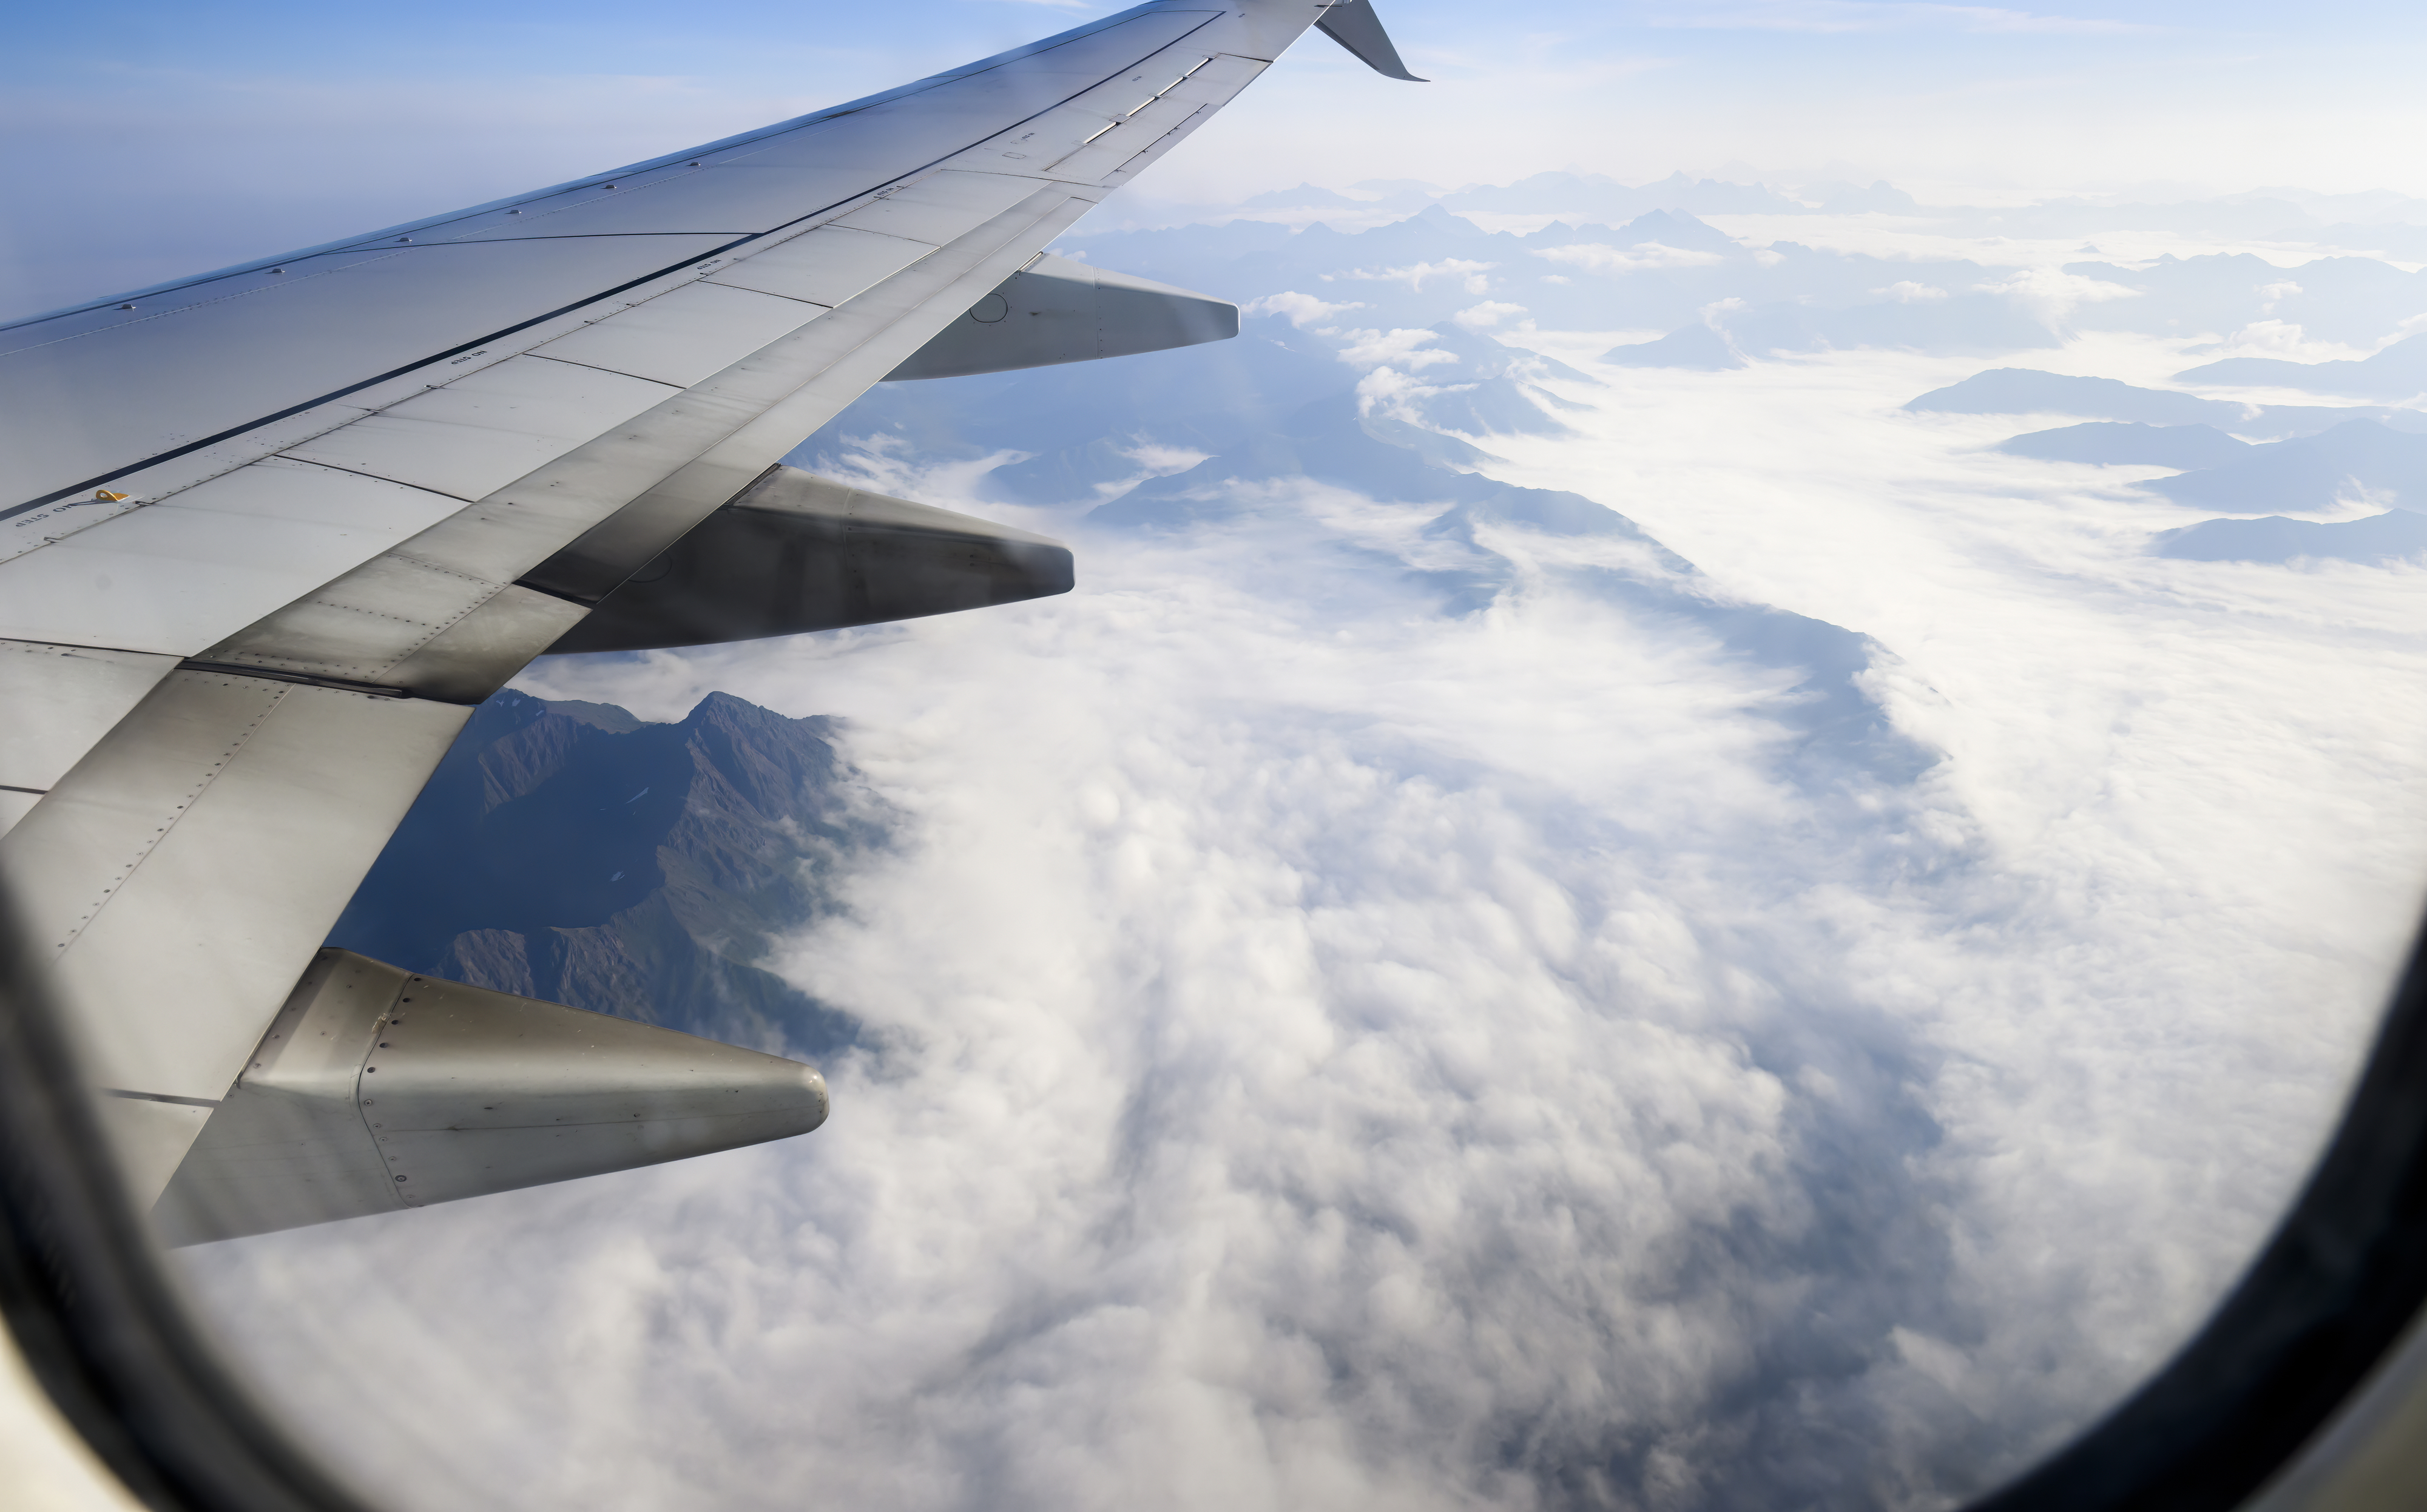 Airplane wing over clouds with mountains in the distance, viewed from window